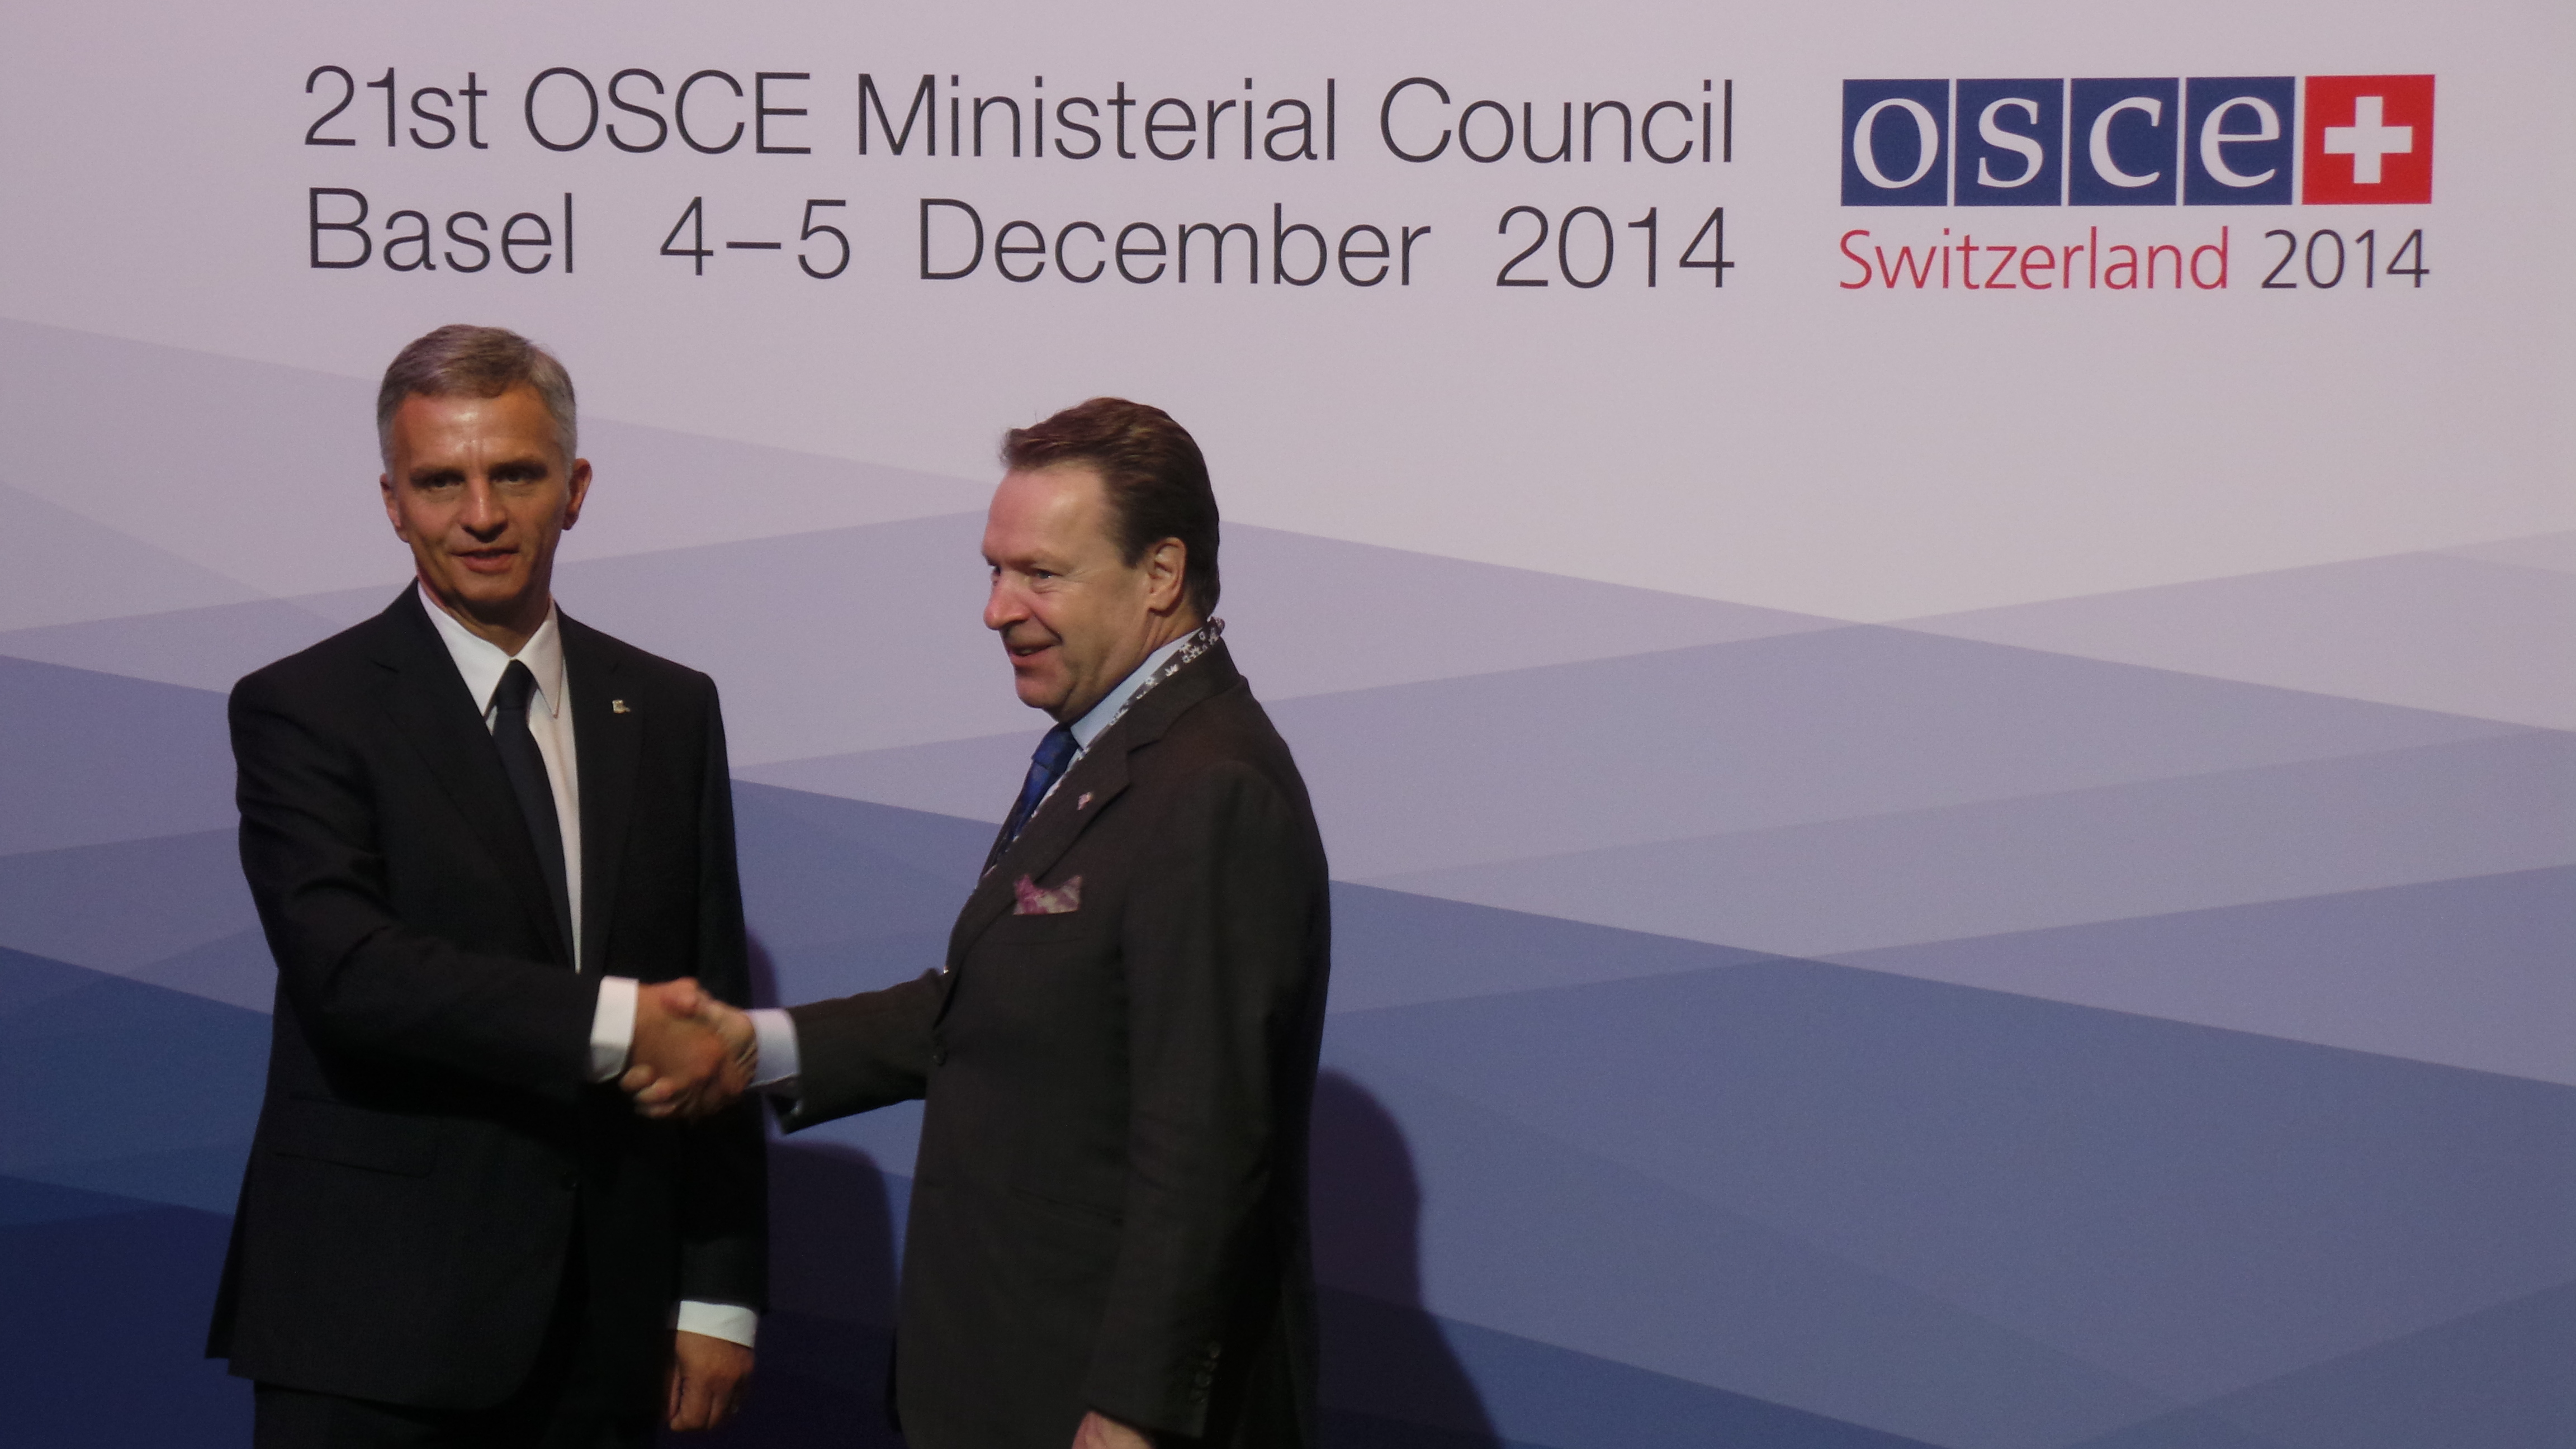 The President of the Swiss Confederation, Didier Burkhalter, greets Ilkka Kanerva, President Parliamentary Assembly at the OSCE Ministerial Council 2014 in Basel